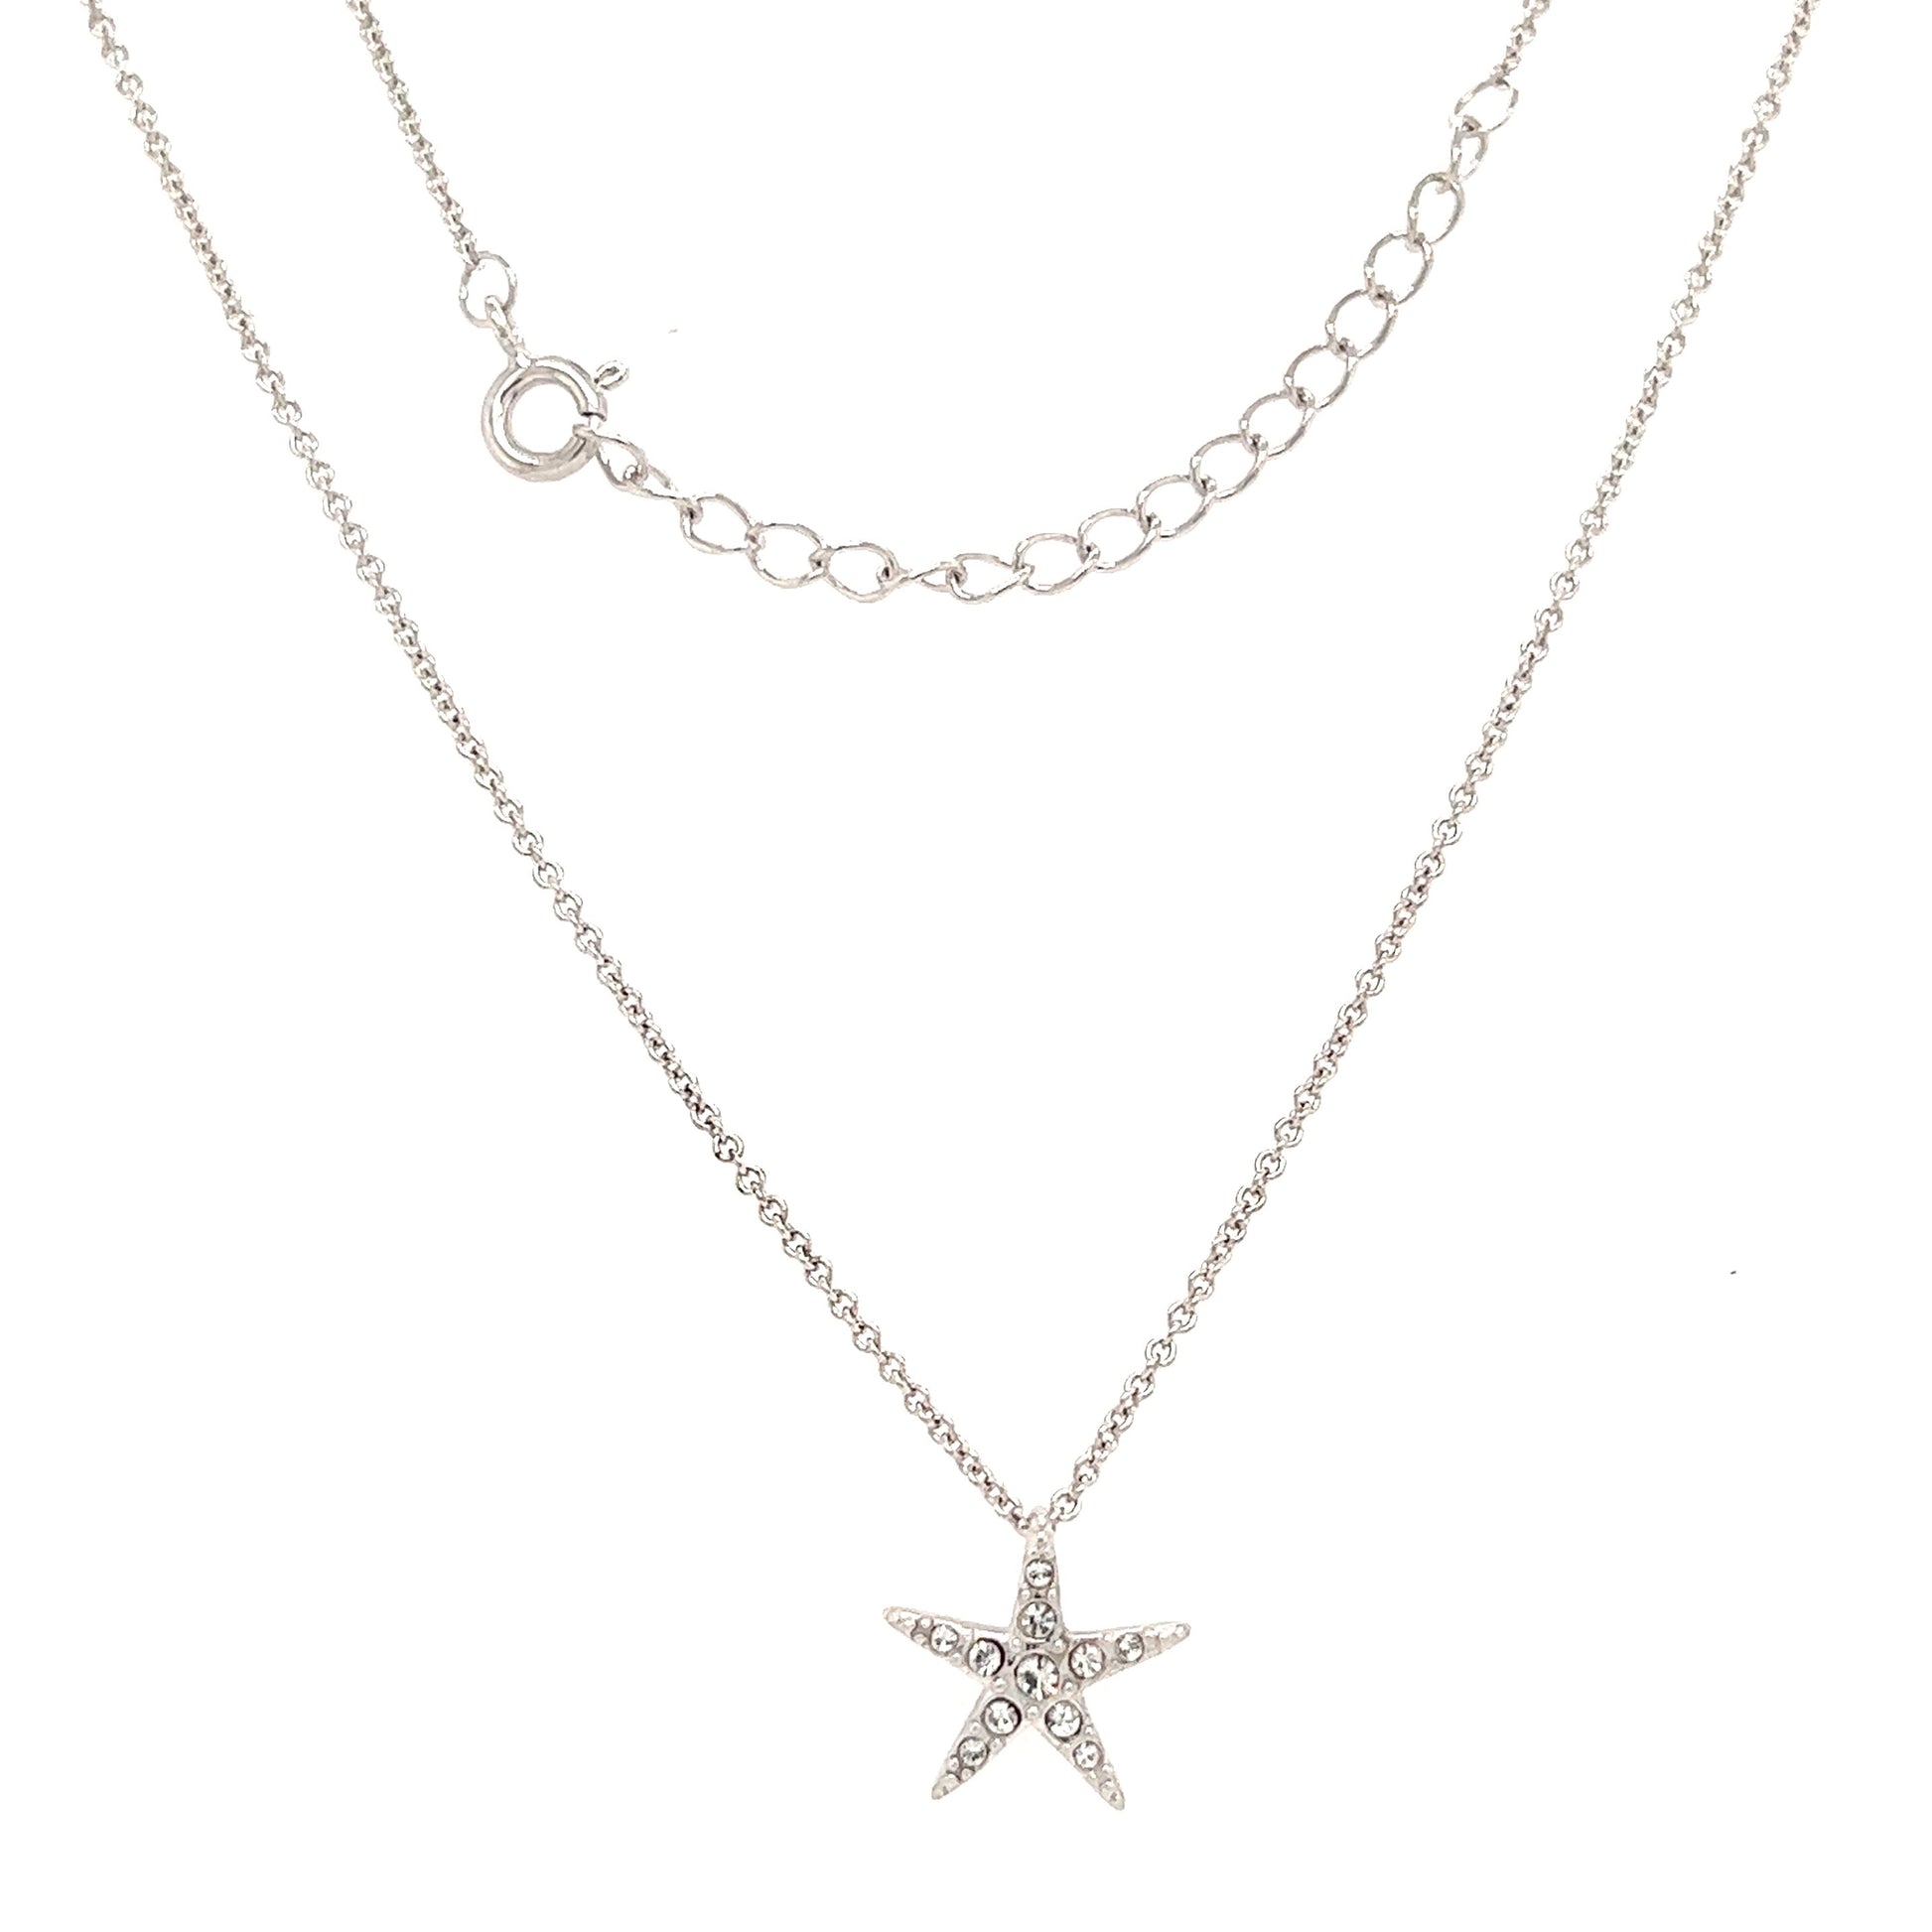 Small Starfish Necklace with White Crystals in Sterling Silver Front & Clasp View